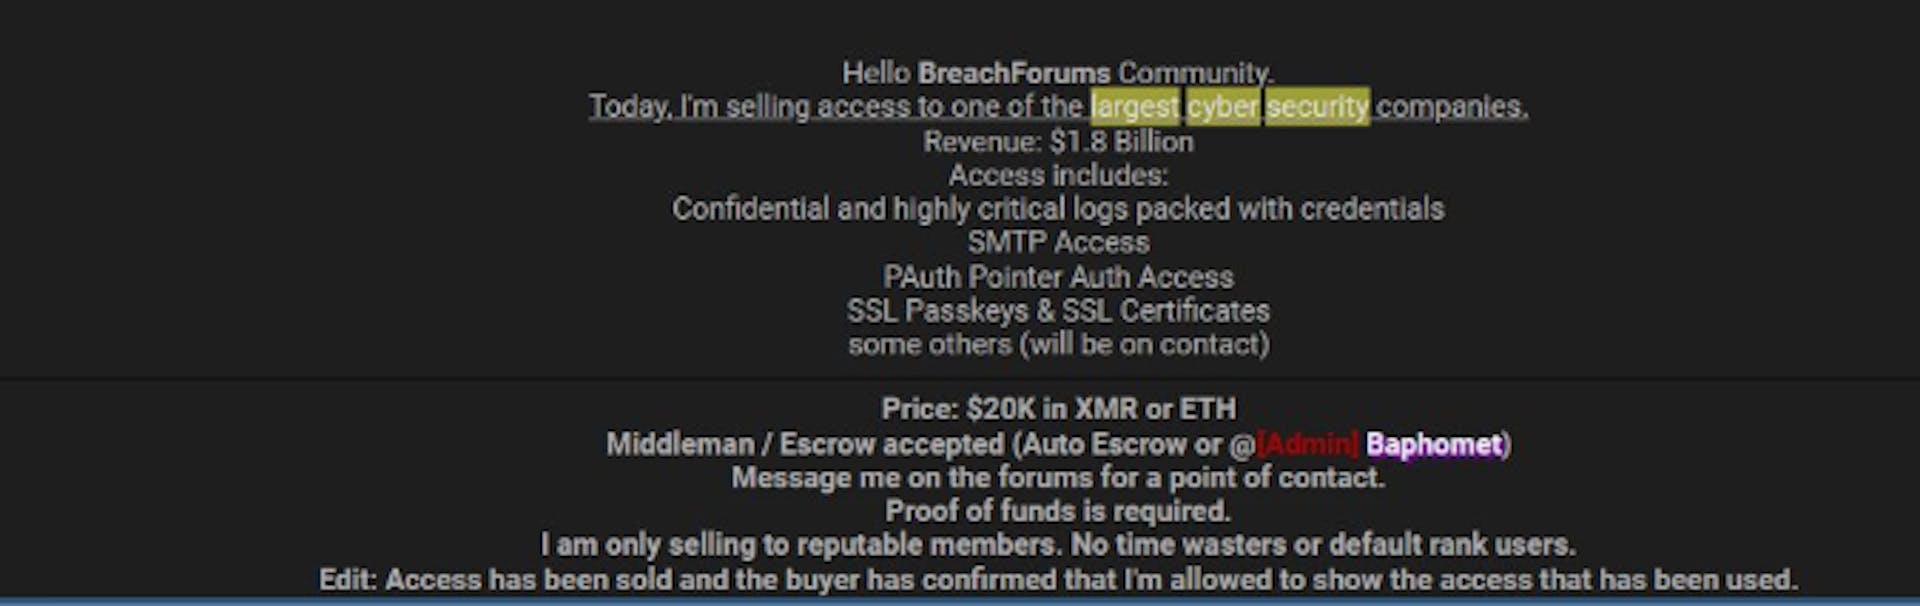 Data breach sale to only reputable members. 